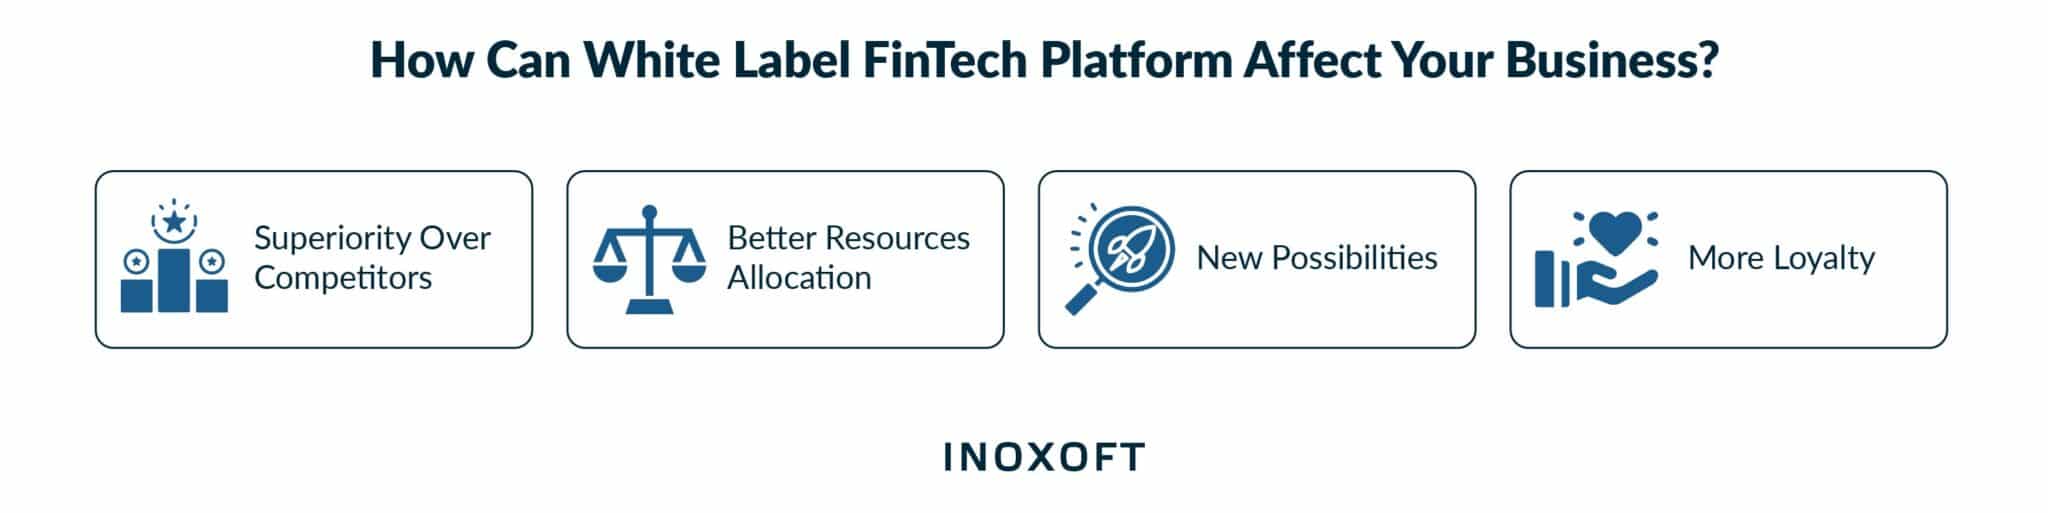 How Can White Label FinTech Platform Affect Your Business?